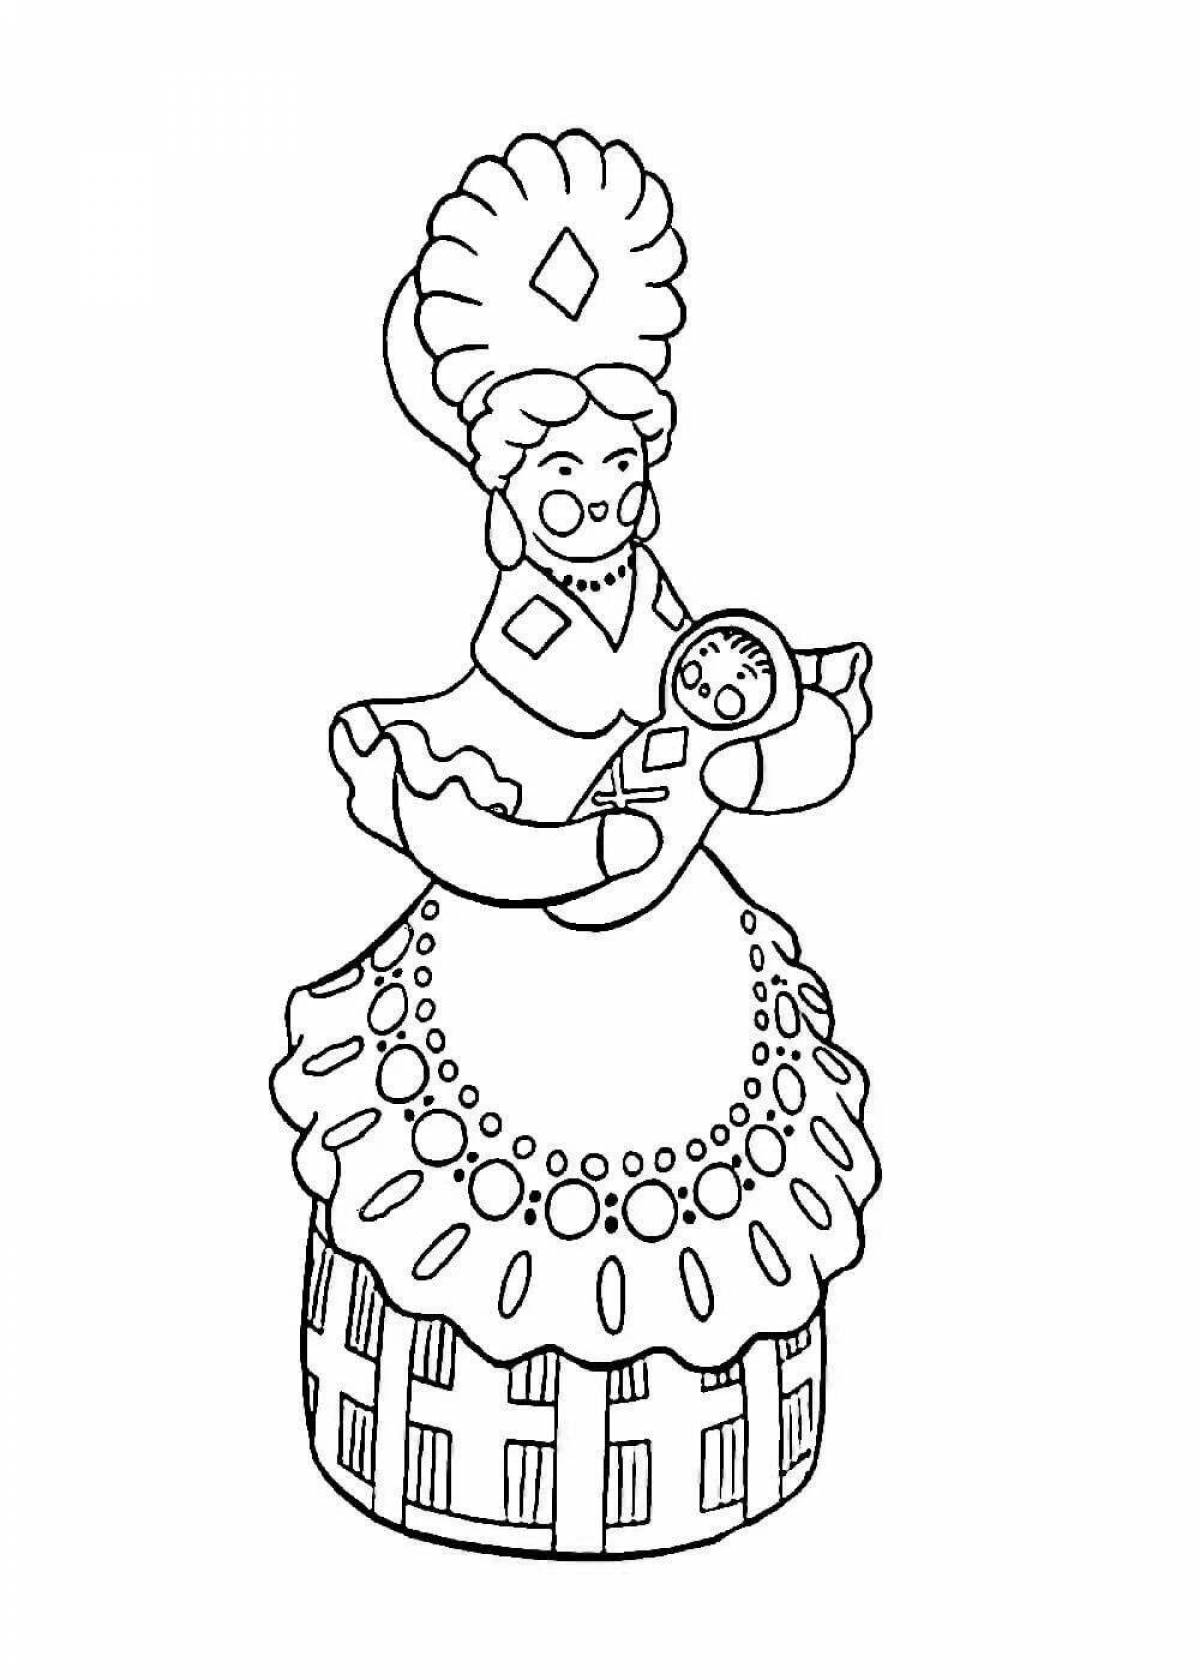 Gorgeous Roman toy coloring book